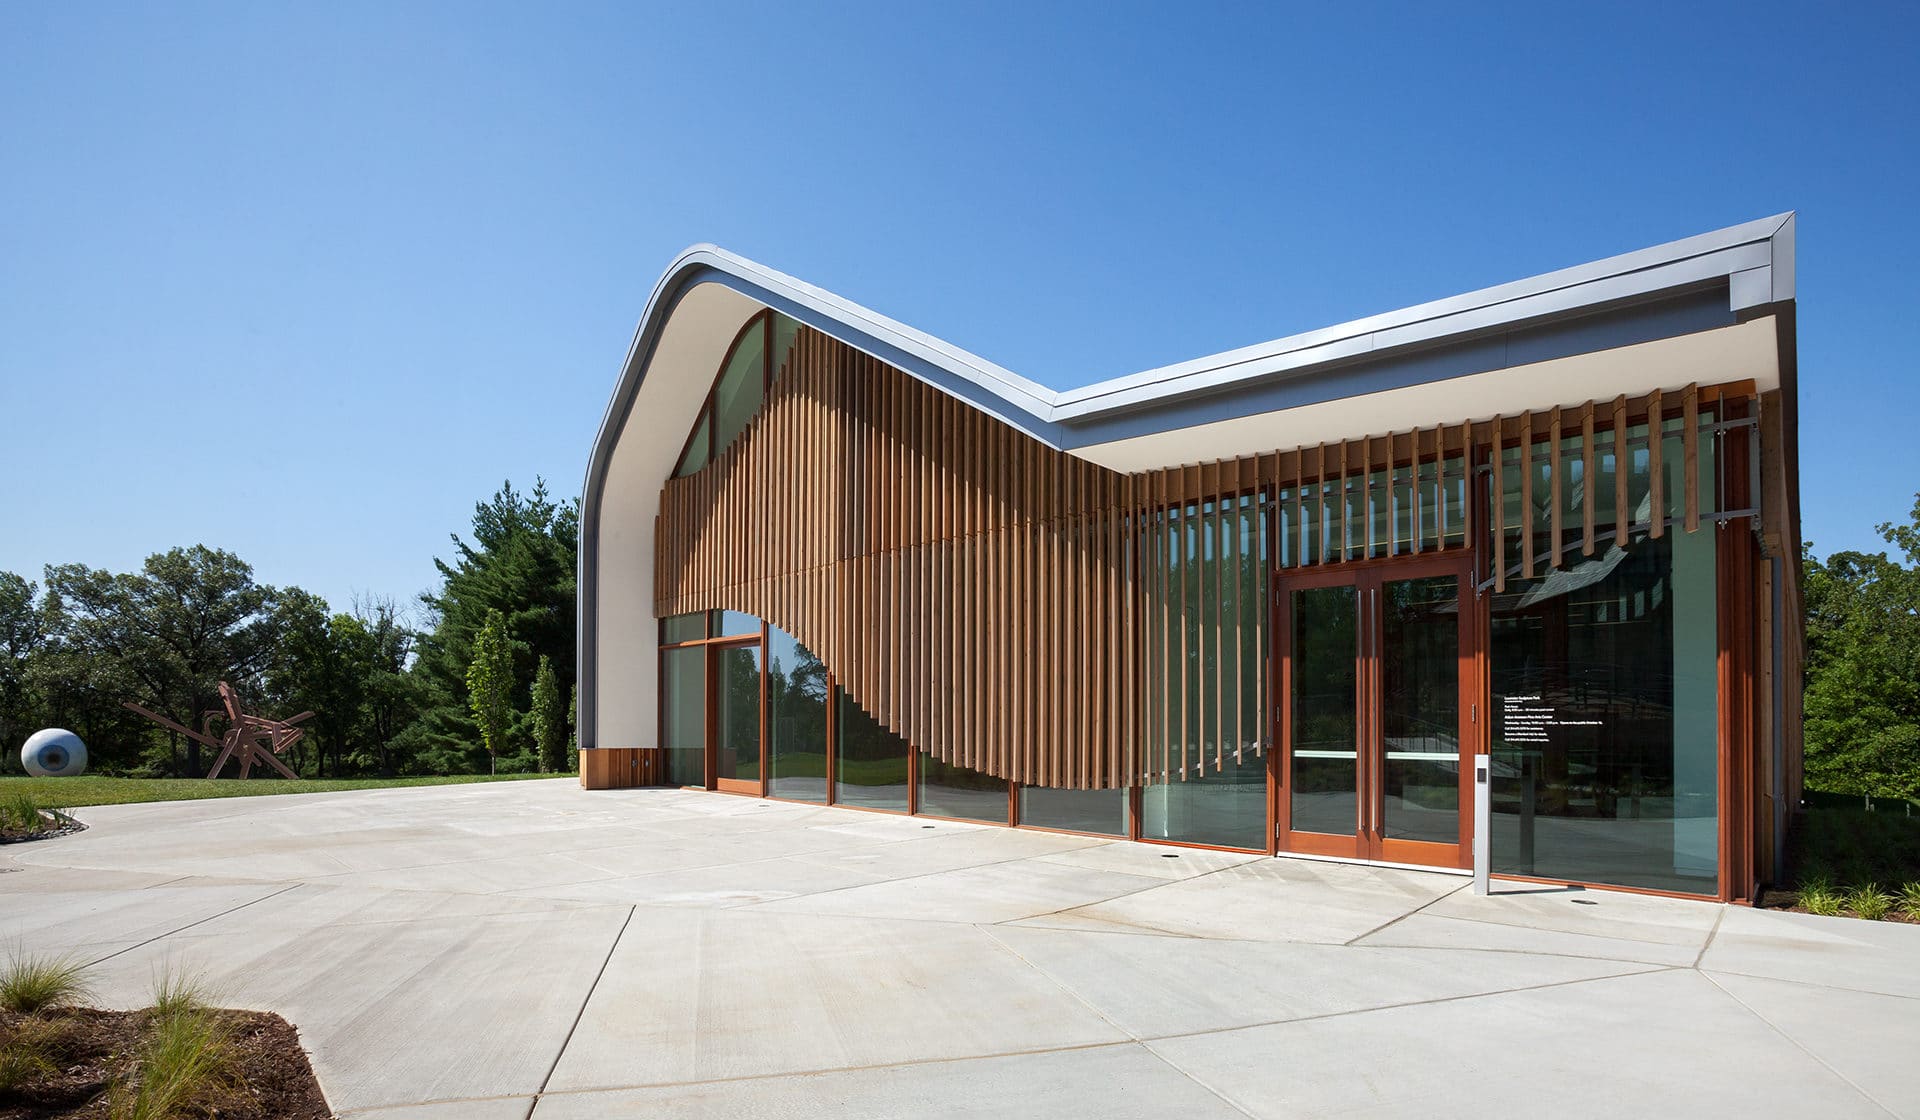 exterior of fine arts center building at laumeier designed by trivers firm